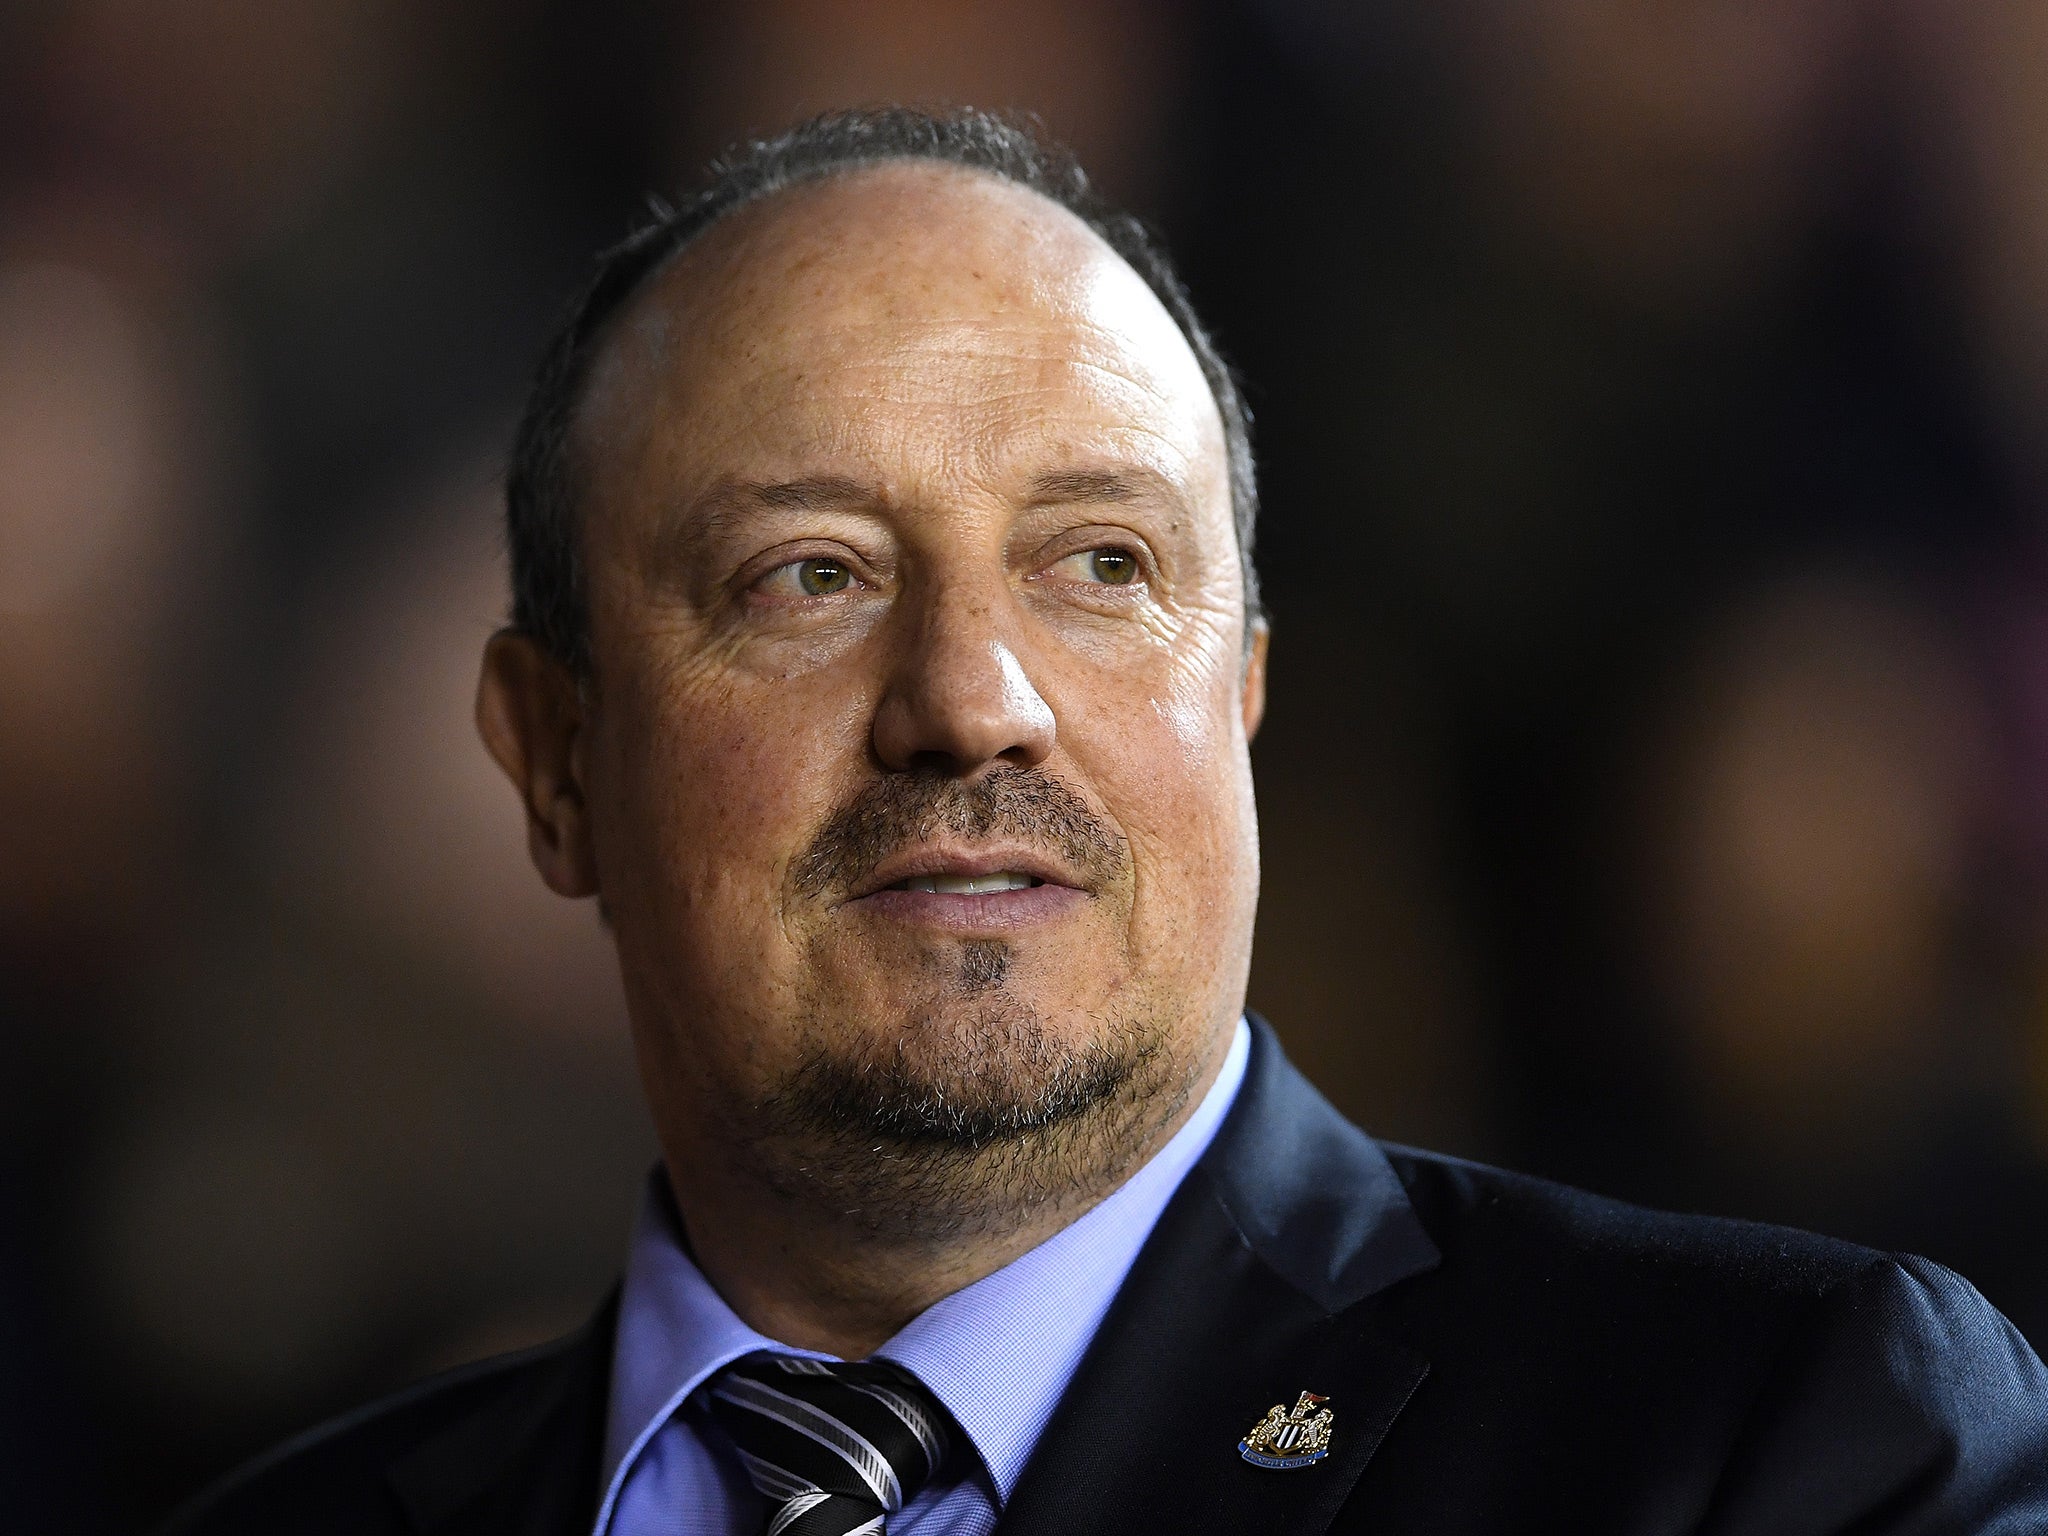 Benitez's future has been the subject of speculation in recent weeks